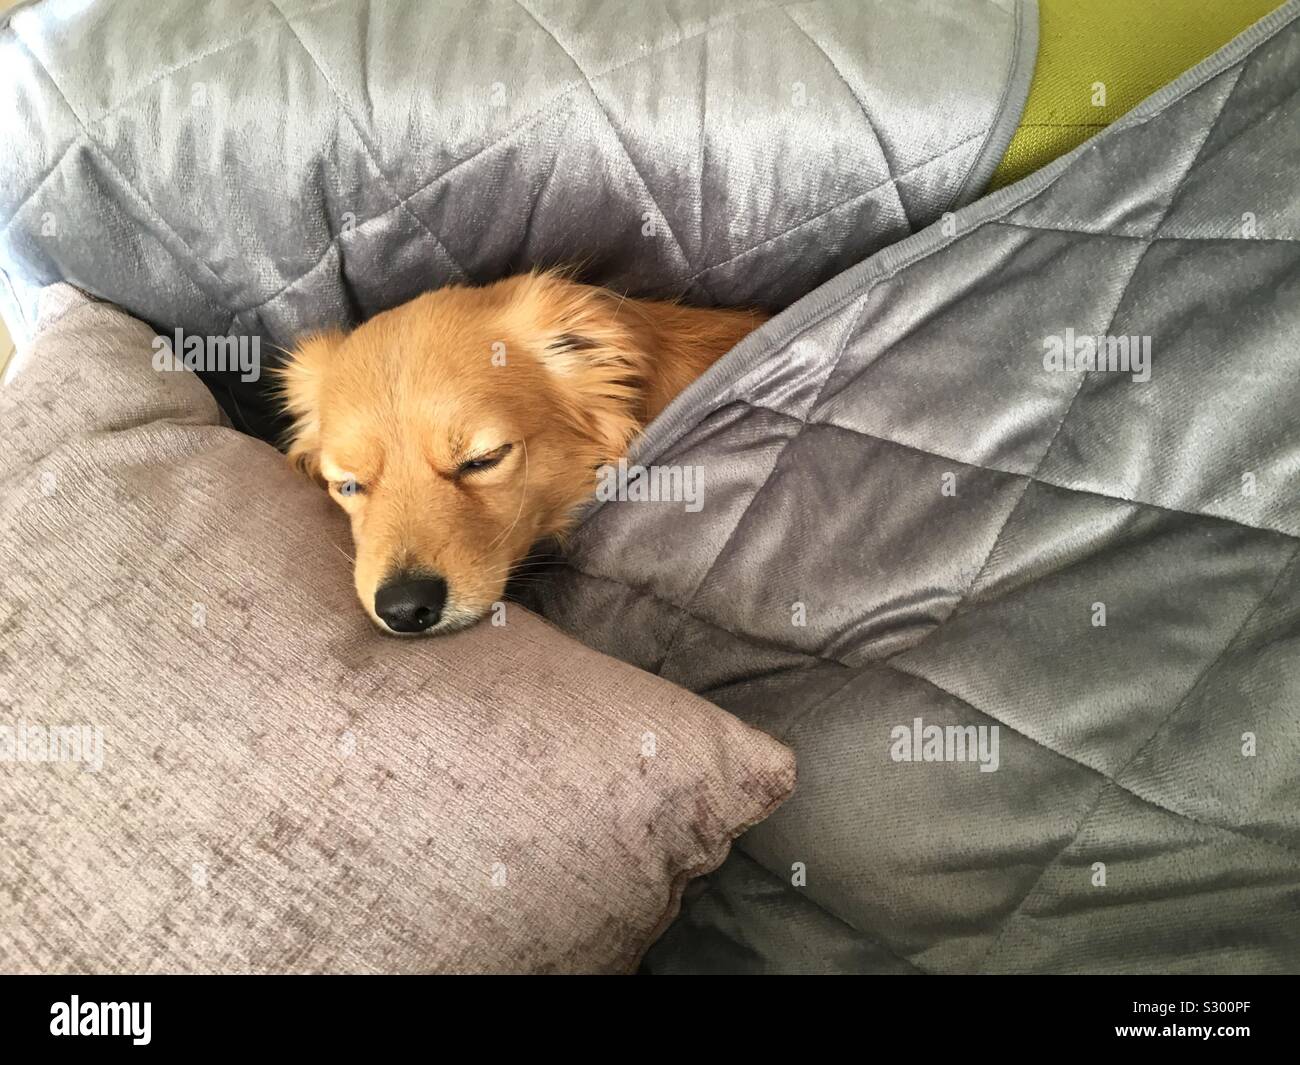 Sleeping cute golden dog under silver-gray blanket. Dreaming so sweet. Somewhere in Europe. Stock Photo